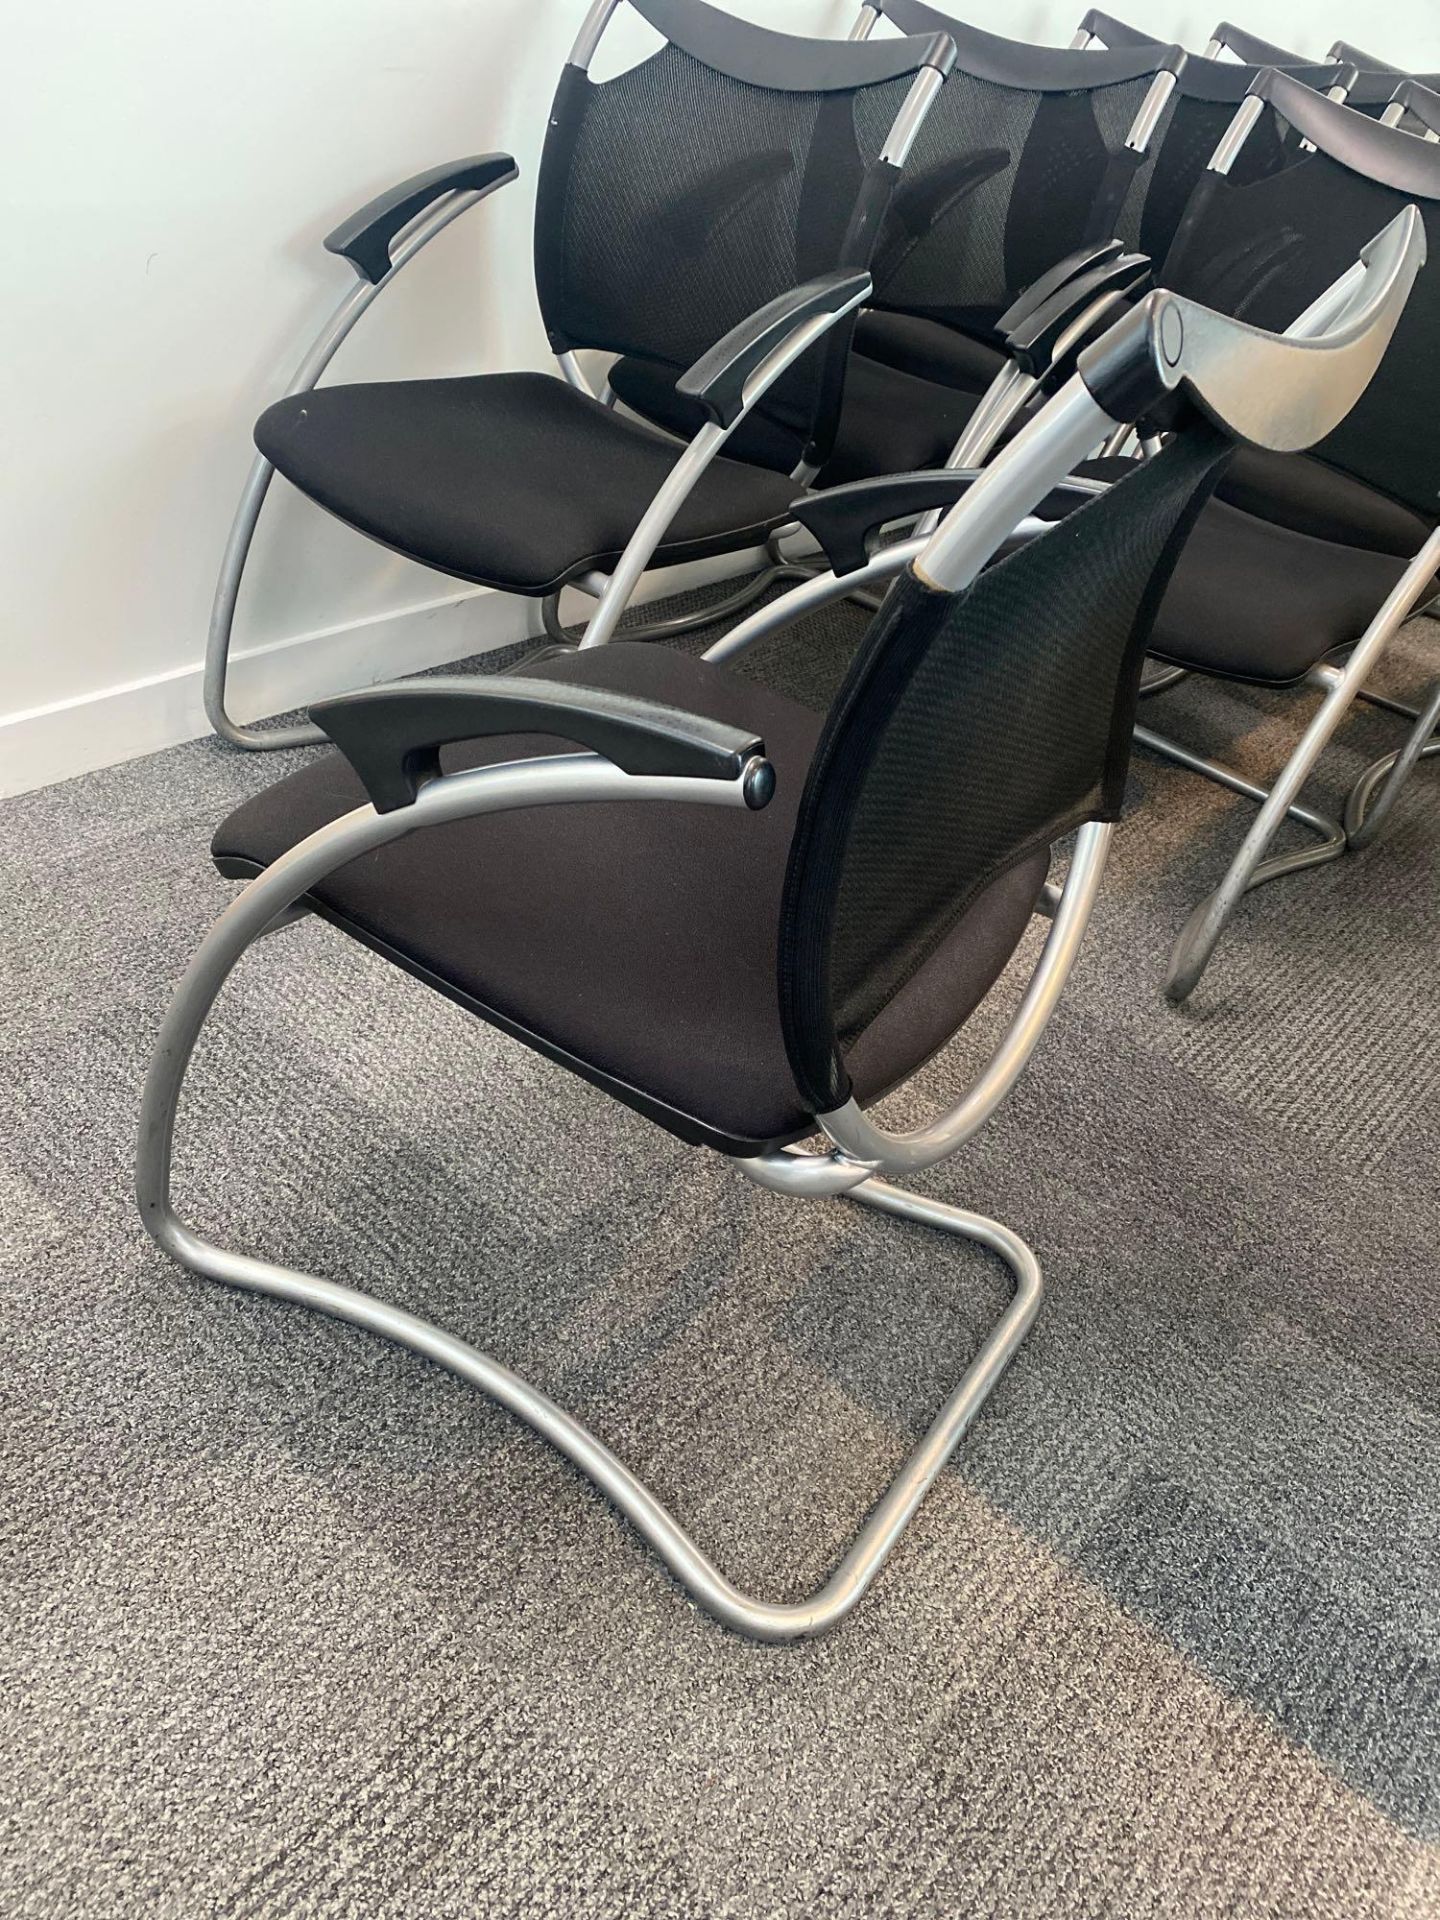 10 LGA GS, chrome frame black mesh back cantilever meeting room chairs - Image 2 of 4